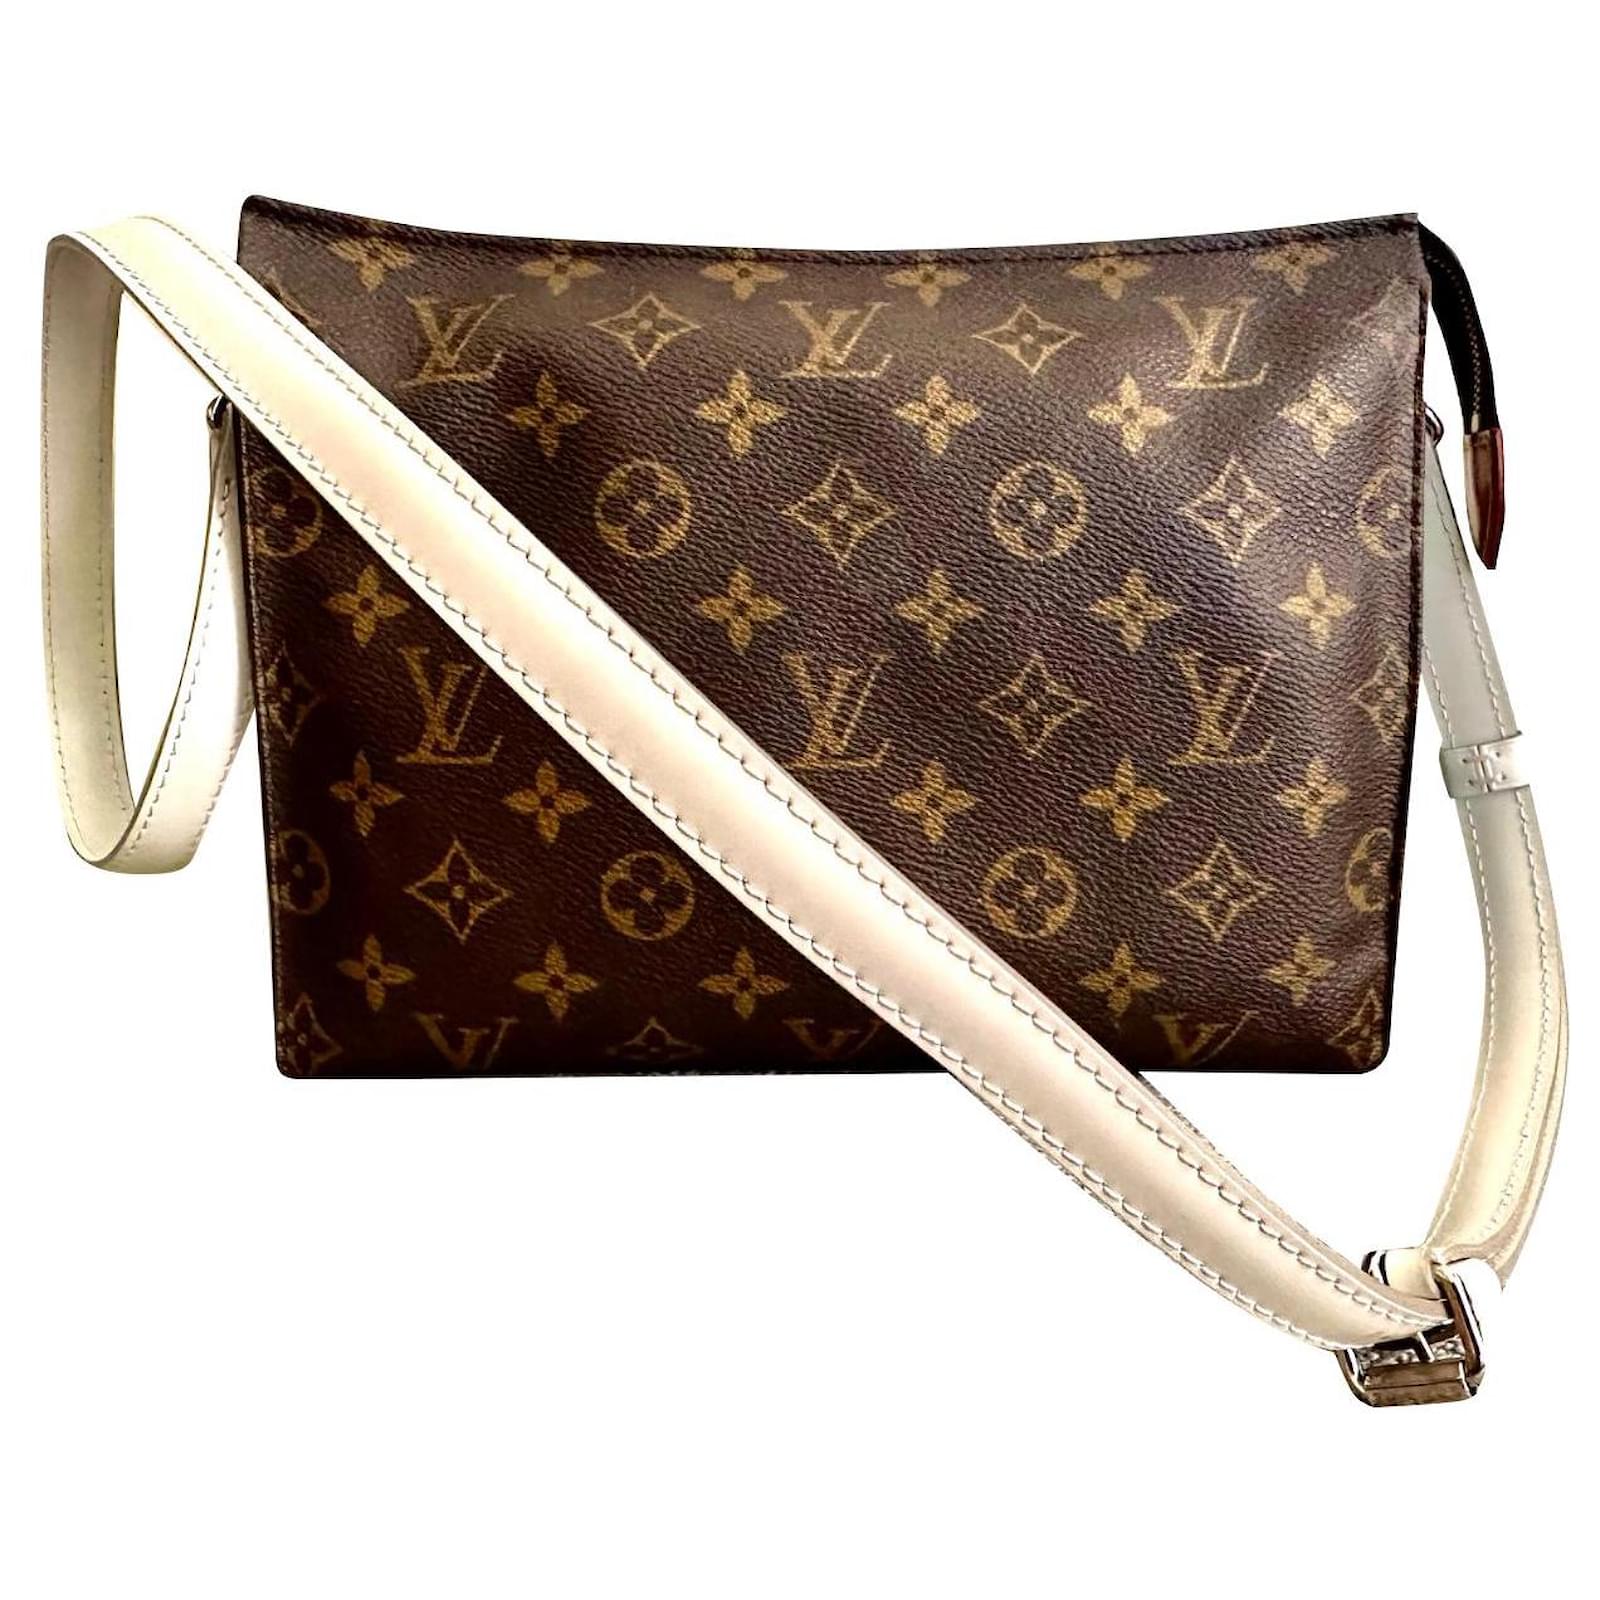 LOUIS VUITTON COSMETIC/TOILETRY CASES